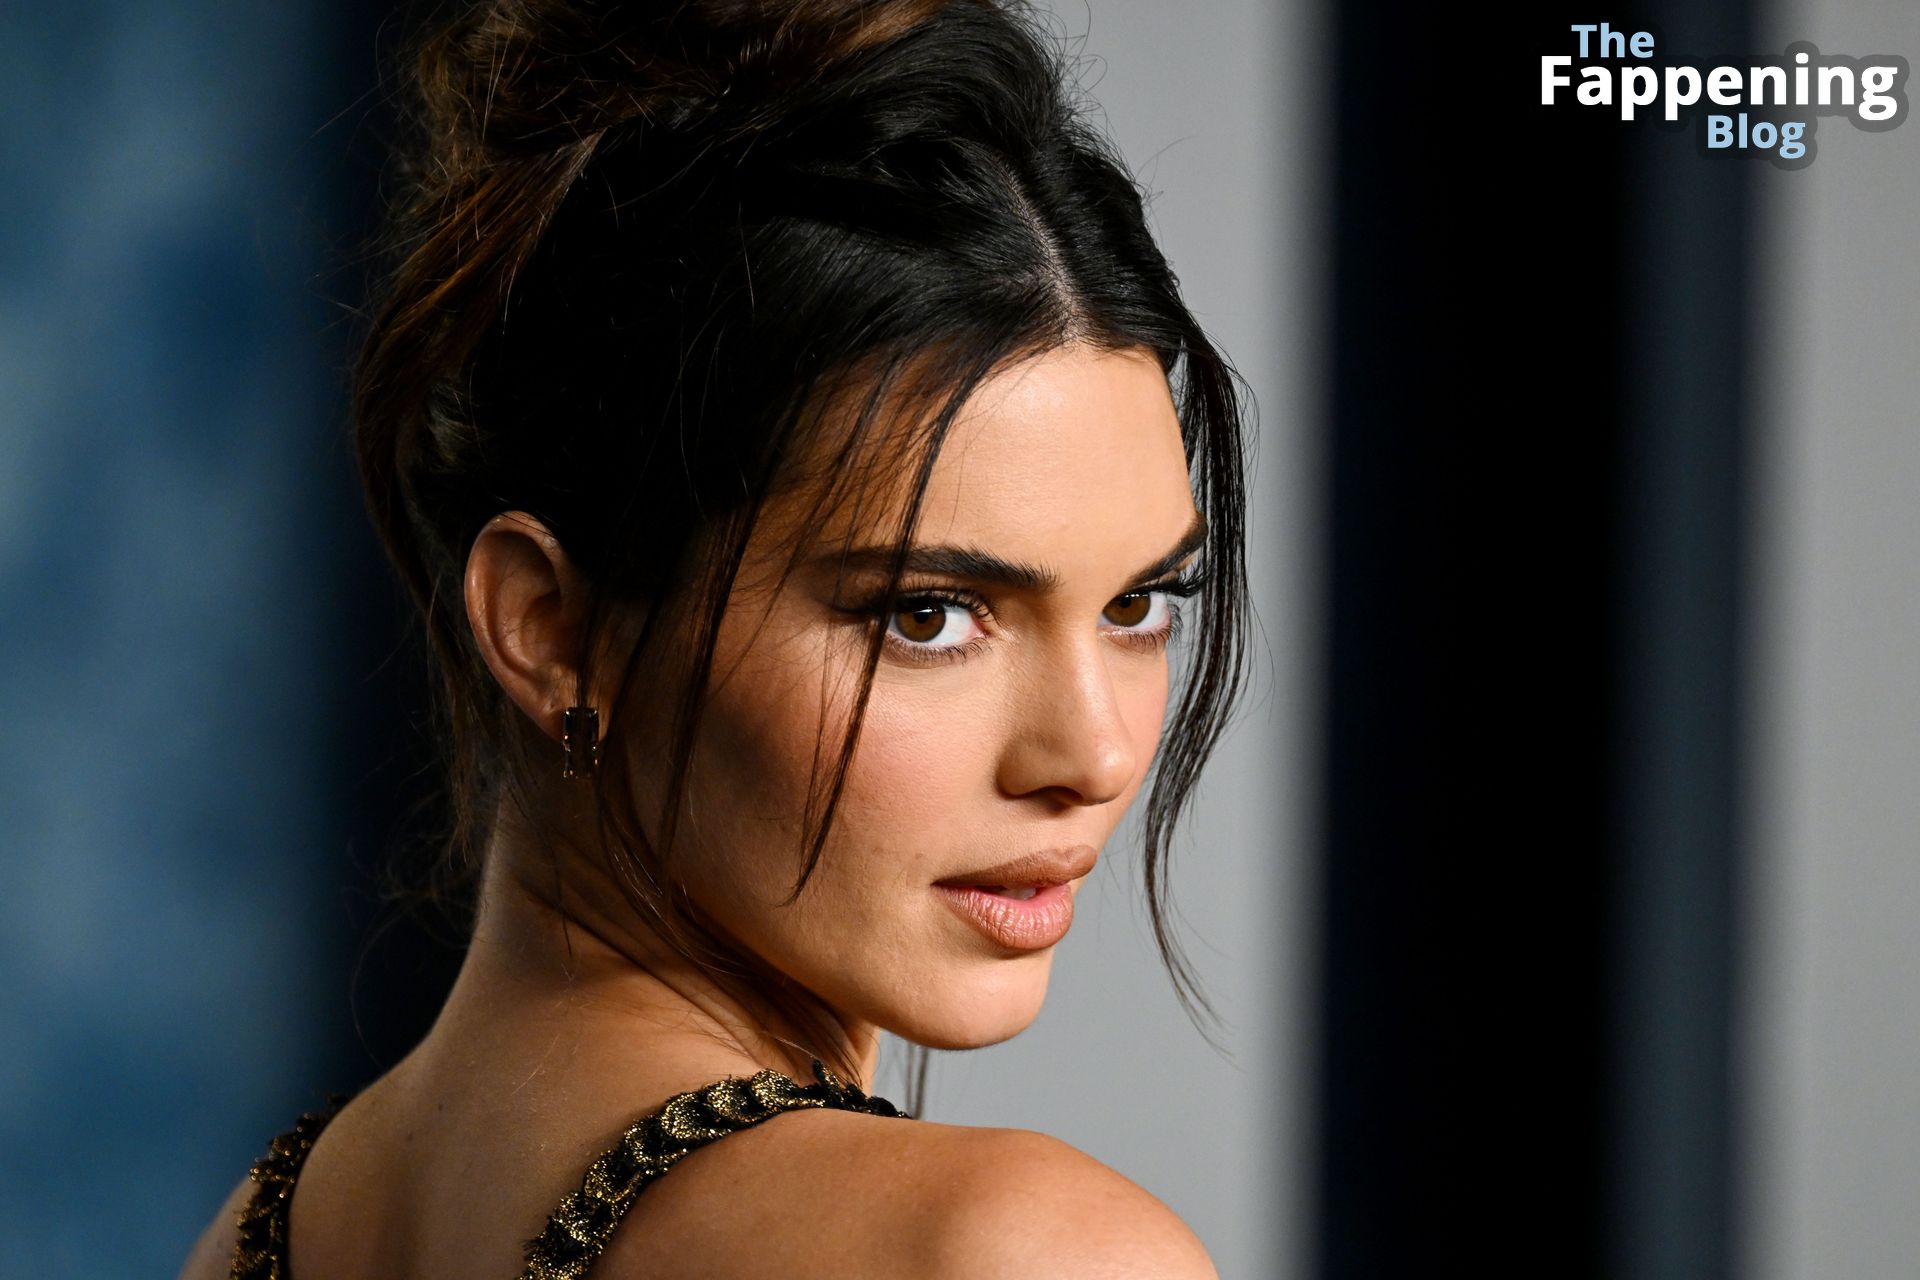 Kendall-Jenner-Sexy-The-Fappening-Blog-71.jpg